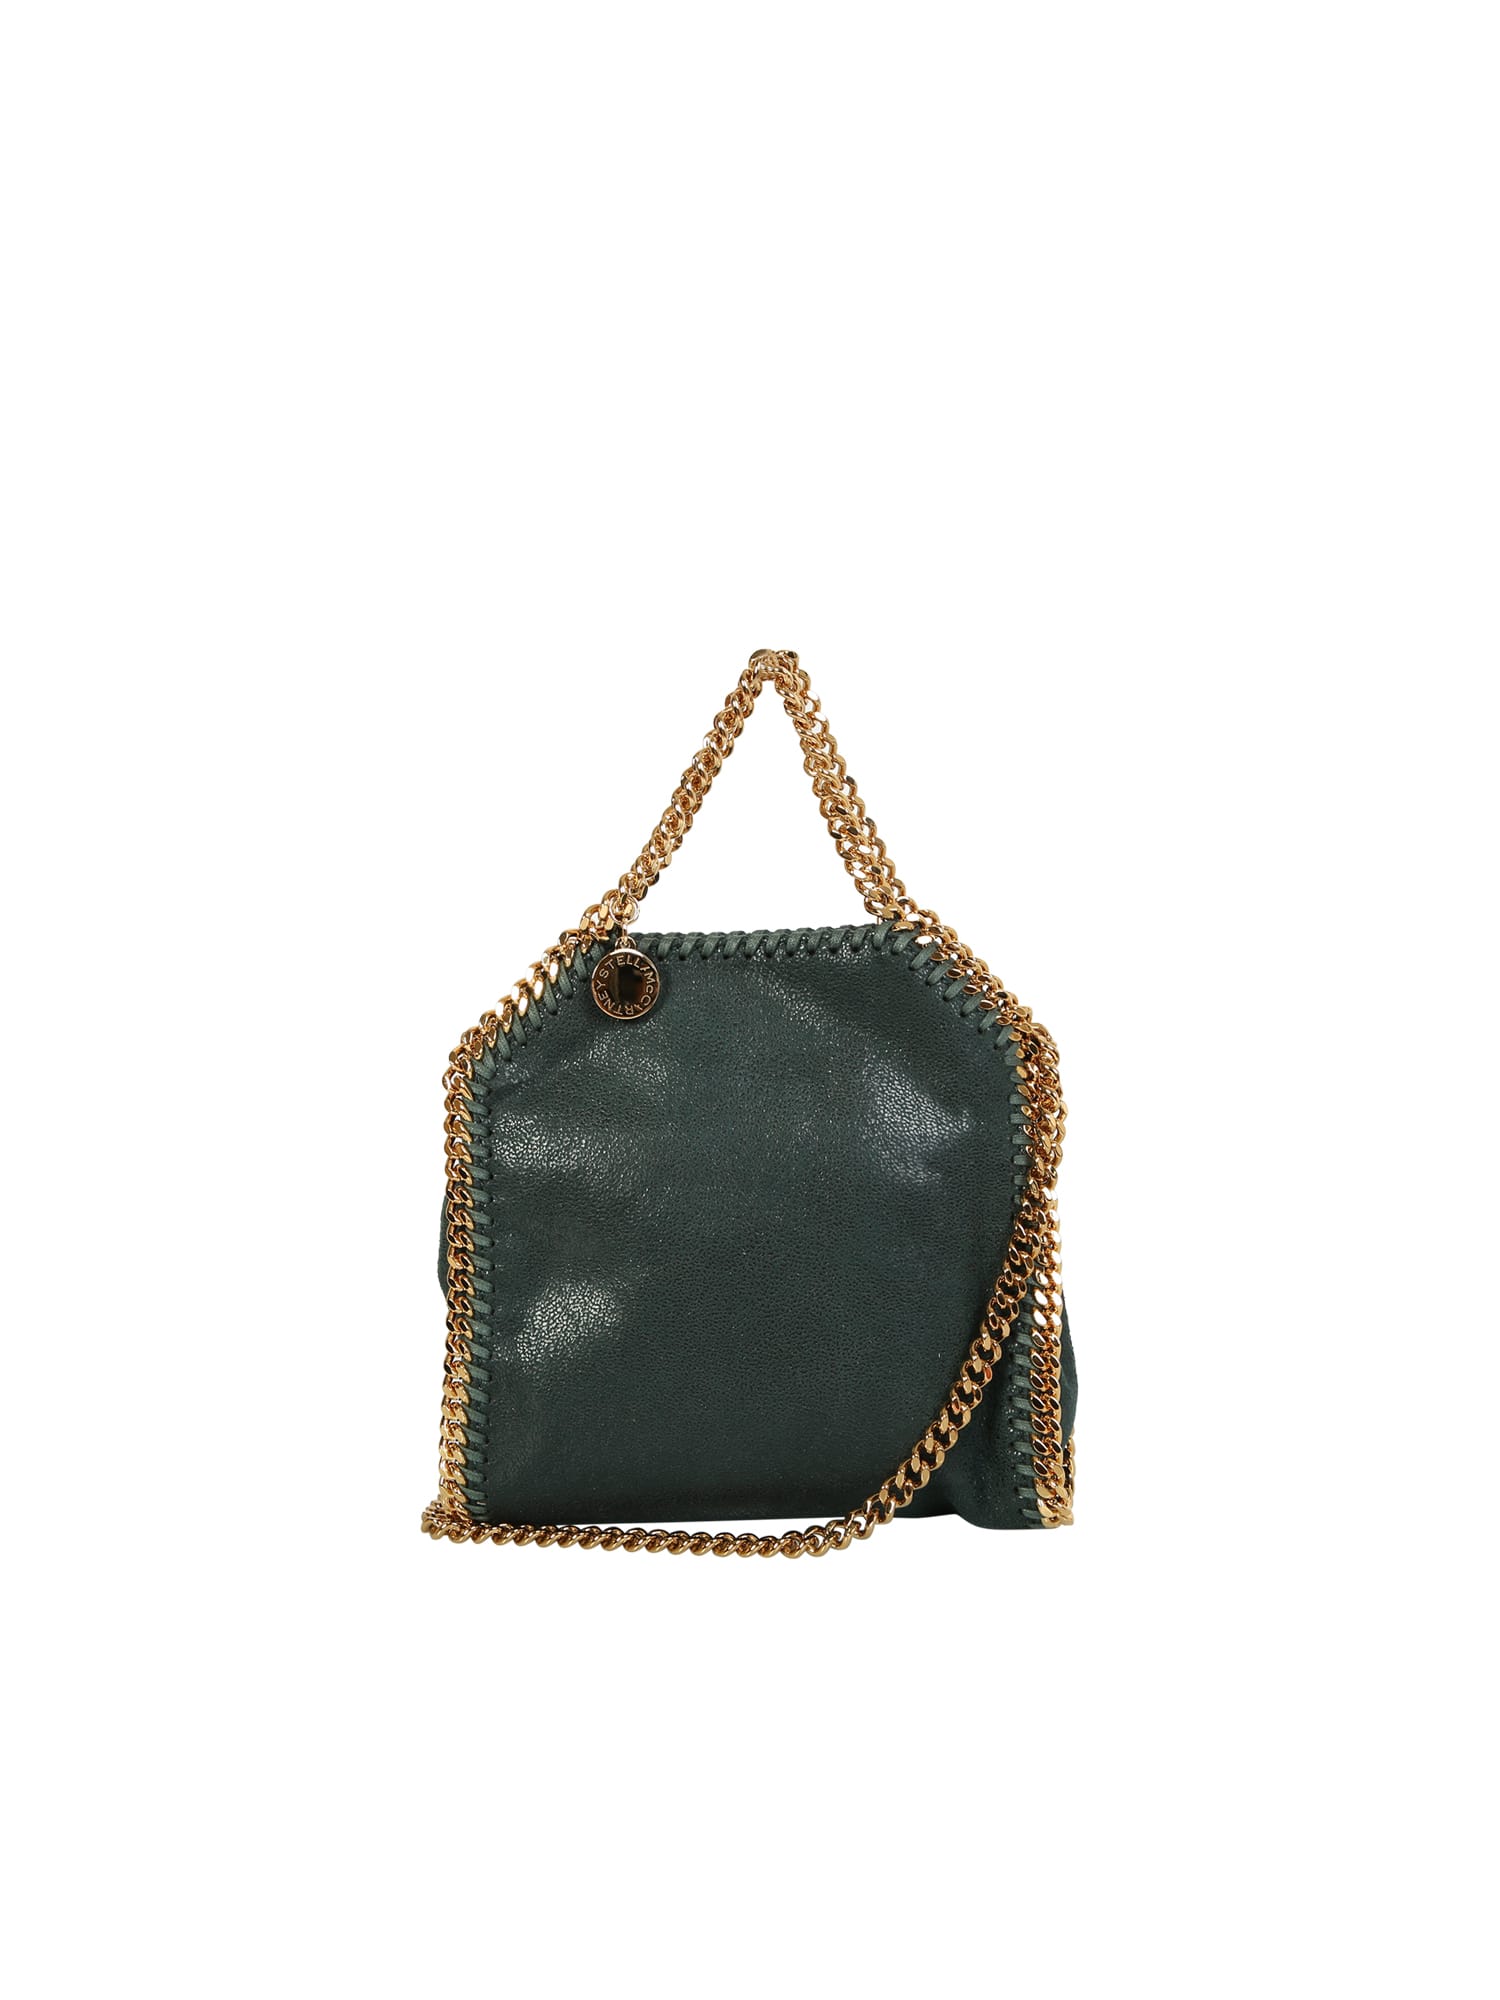 Stella Mccartney Tiny Falabella Is The Mini Version Of The Maisons Iconic Bag